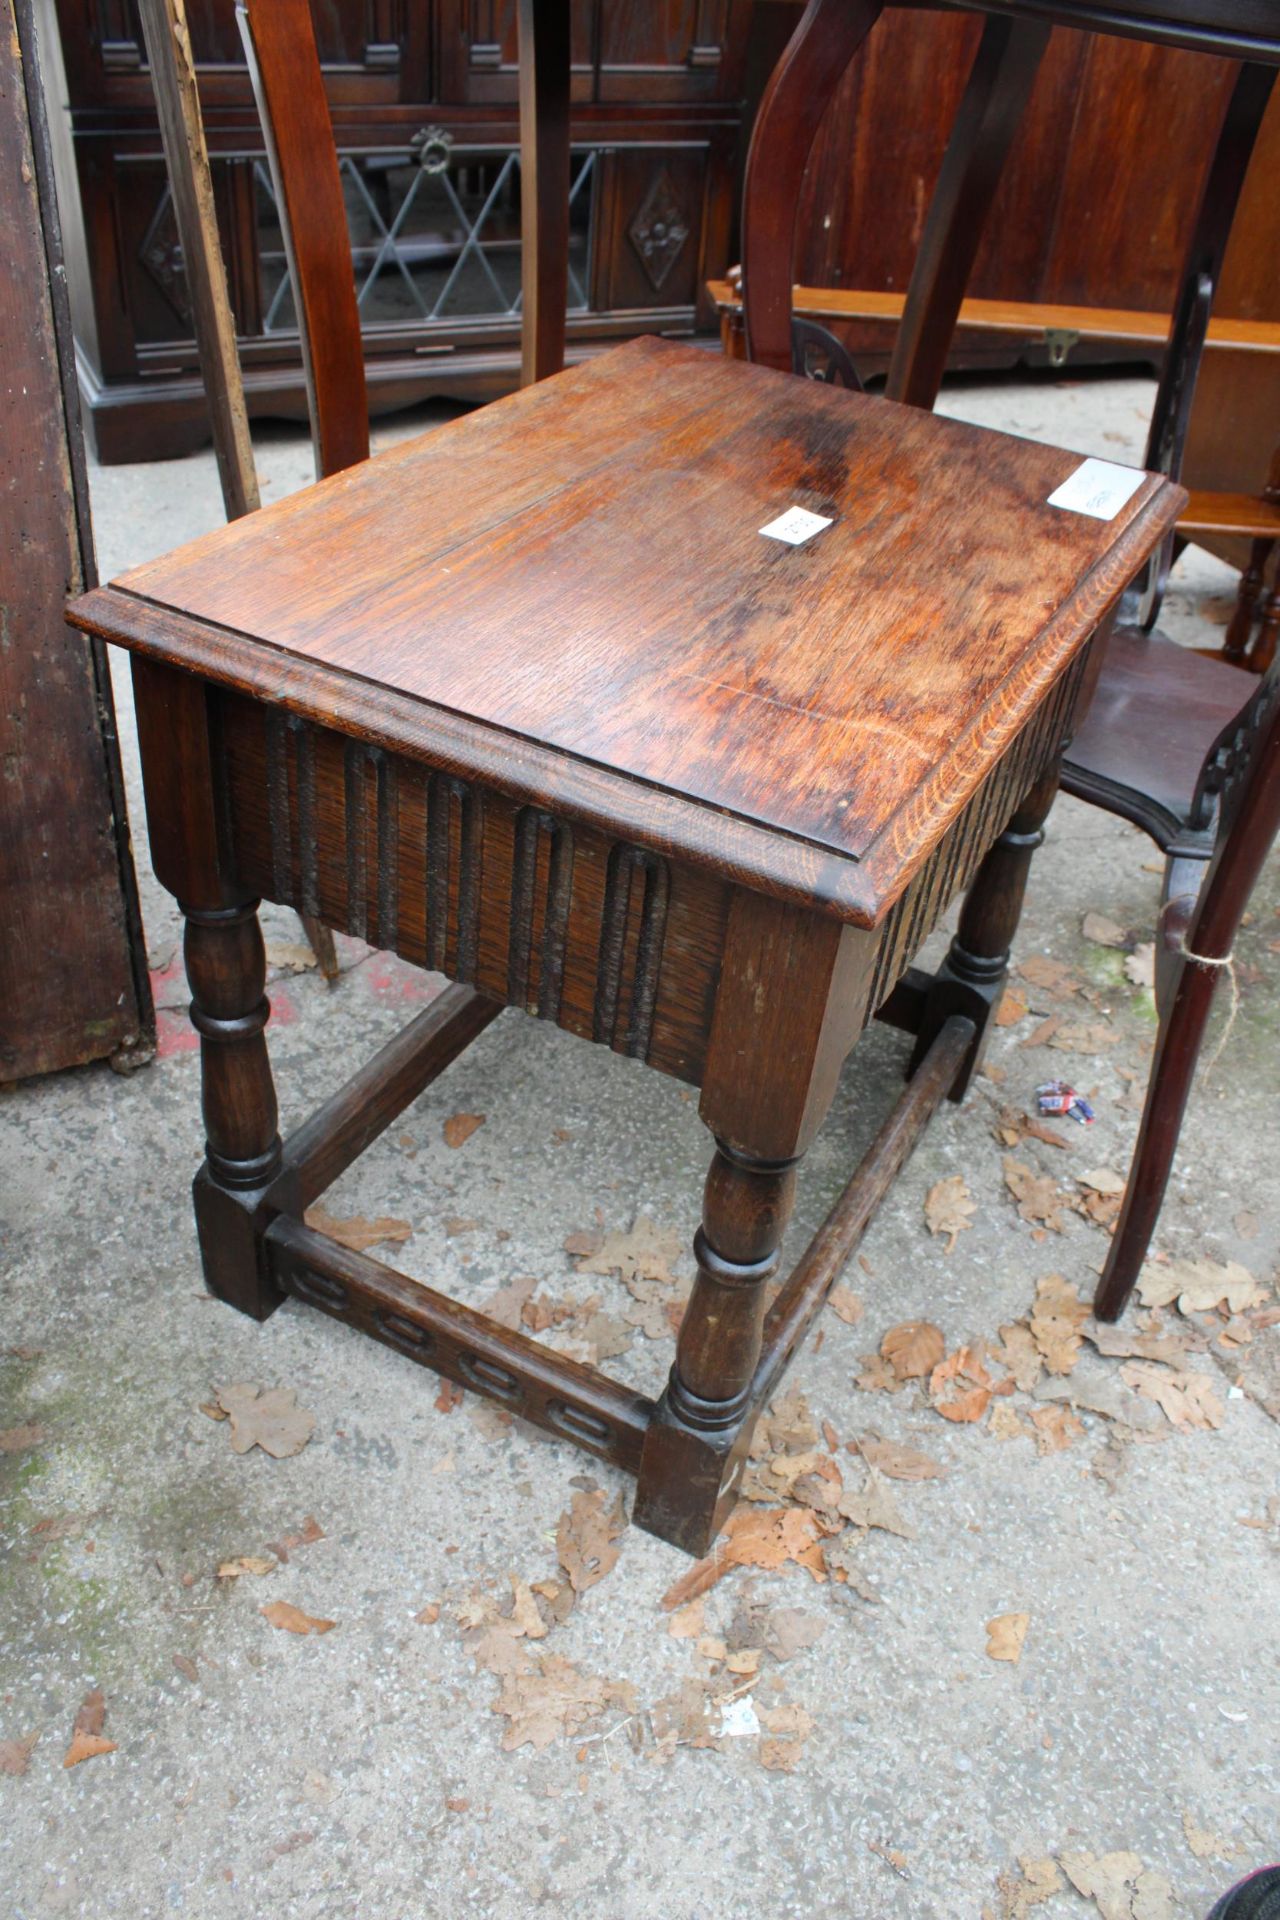 AN OAK JACOBEAN STYLE OAK STOOL WITH DRAWER - Image 2 of 3